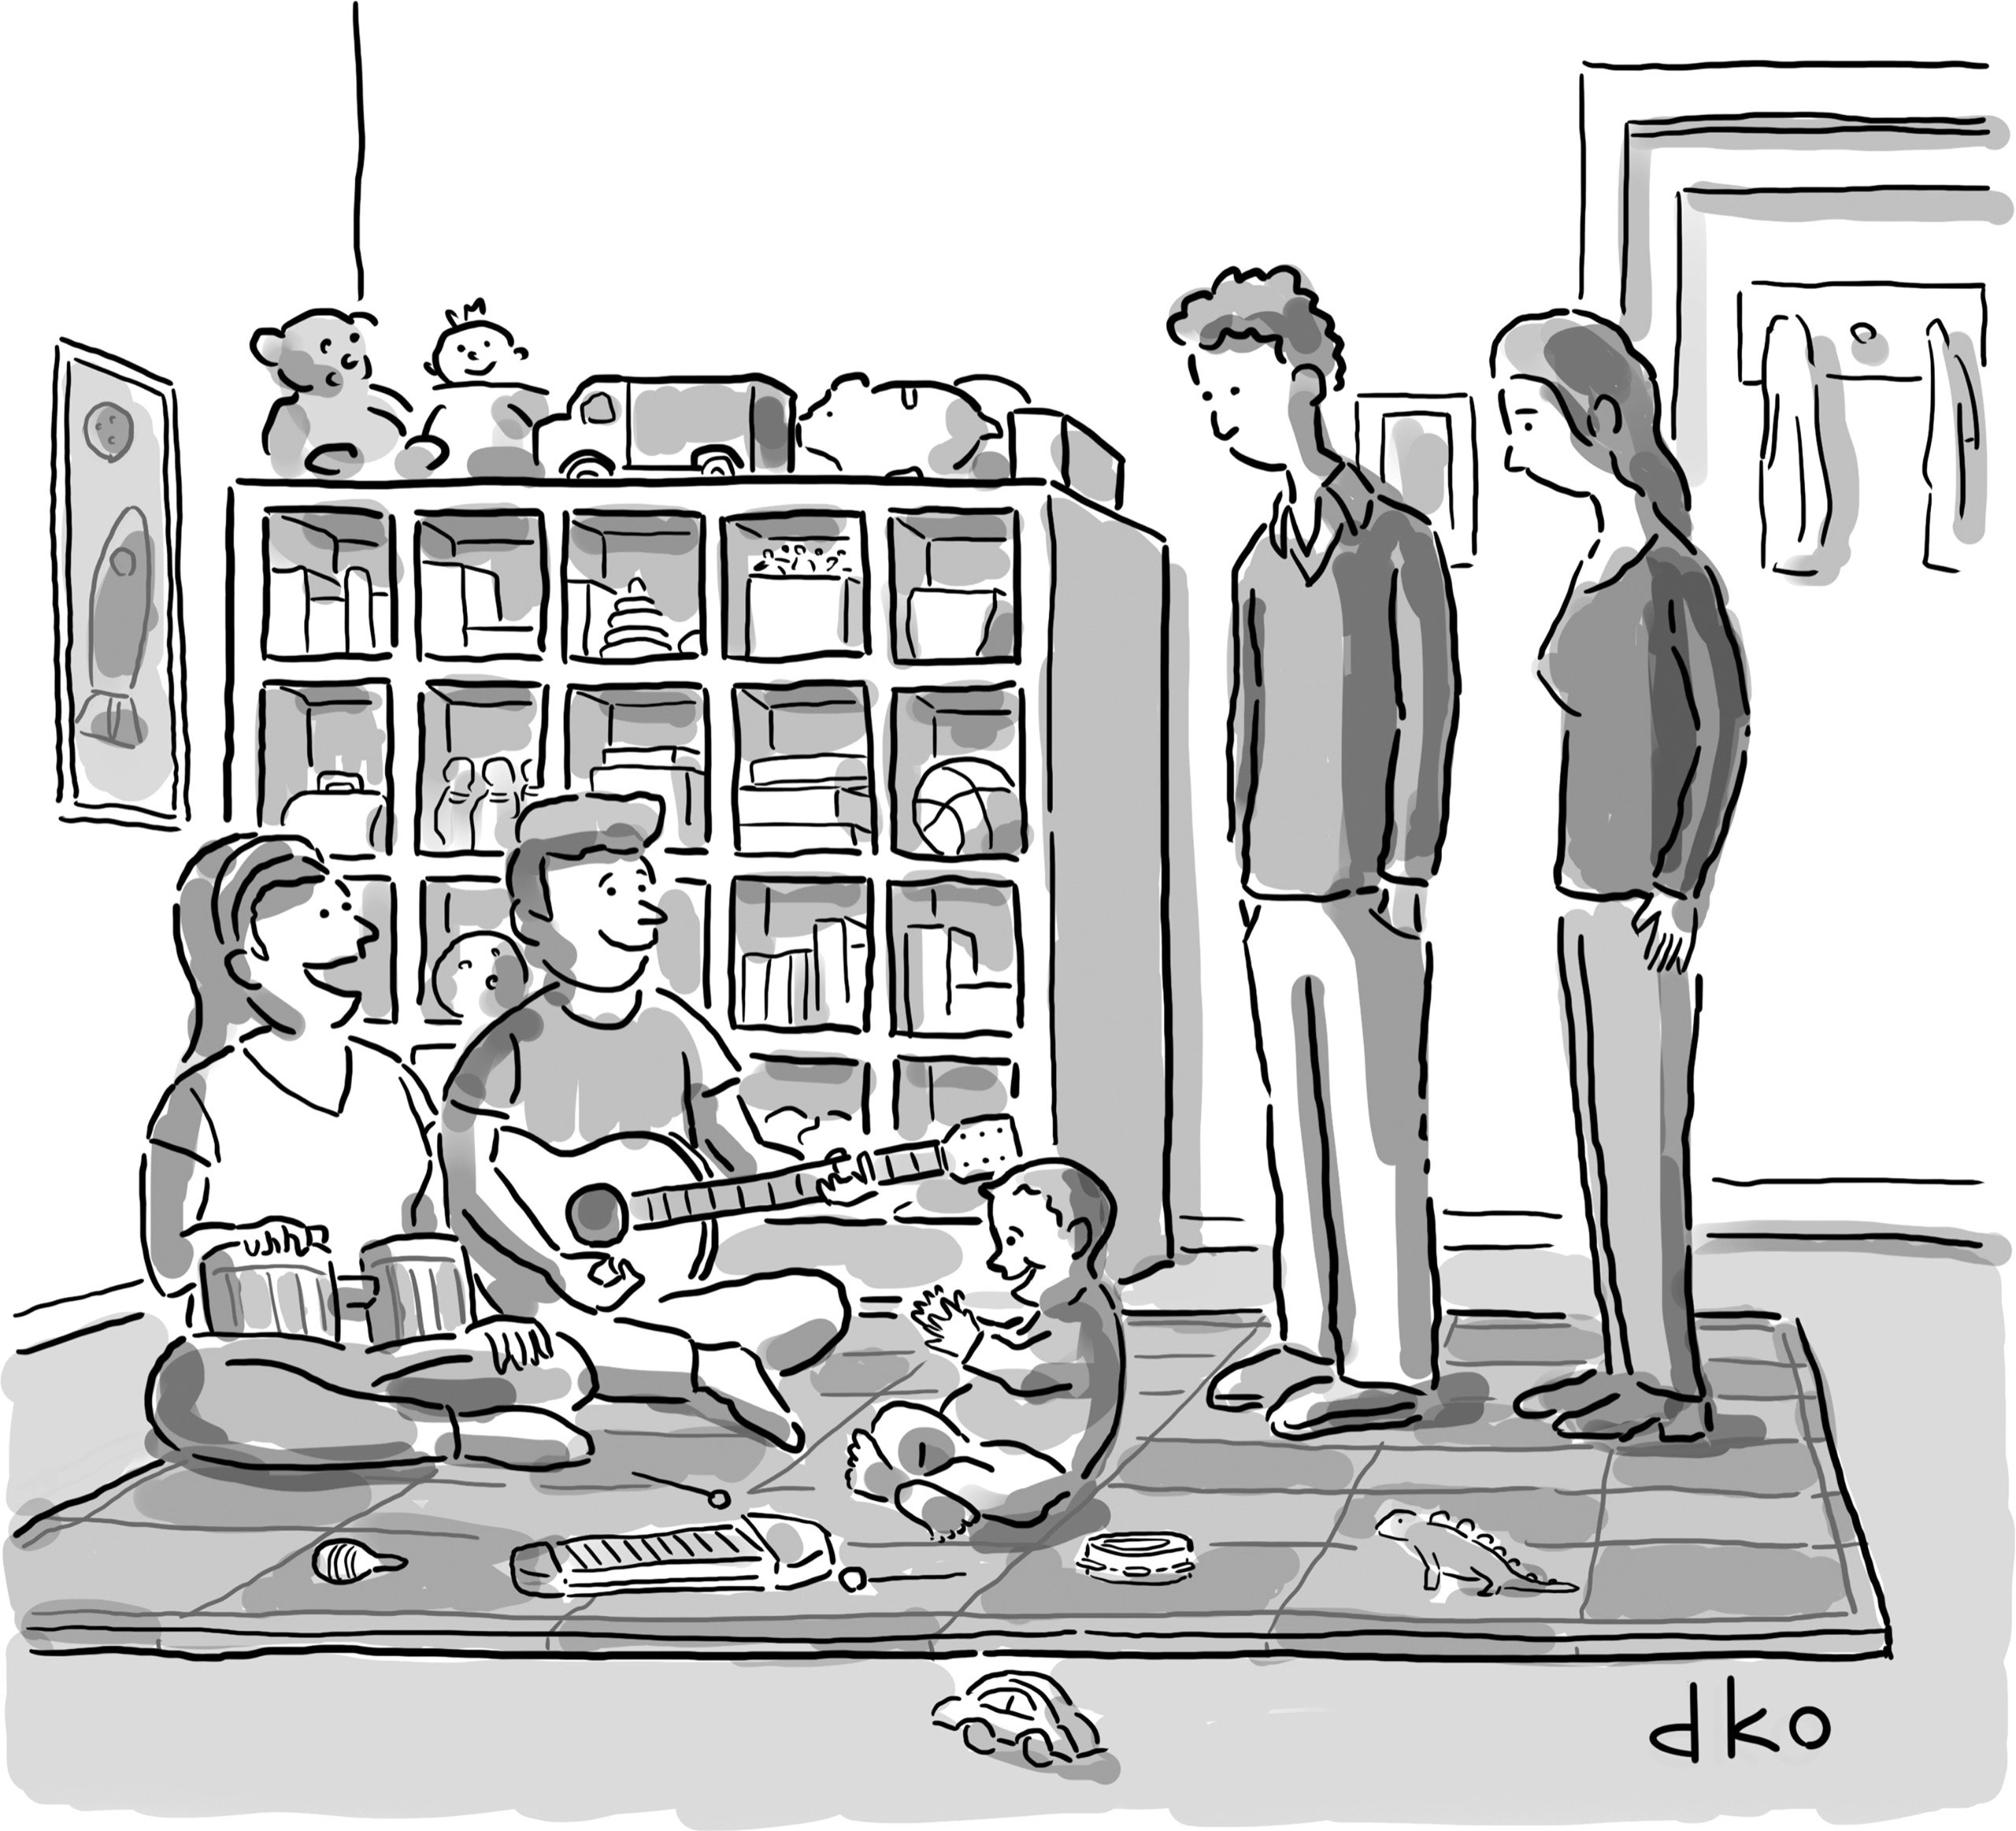 Parents sitting in playroom with child, playing instruments, two persons standing next to them.